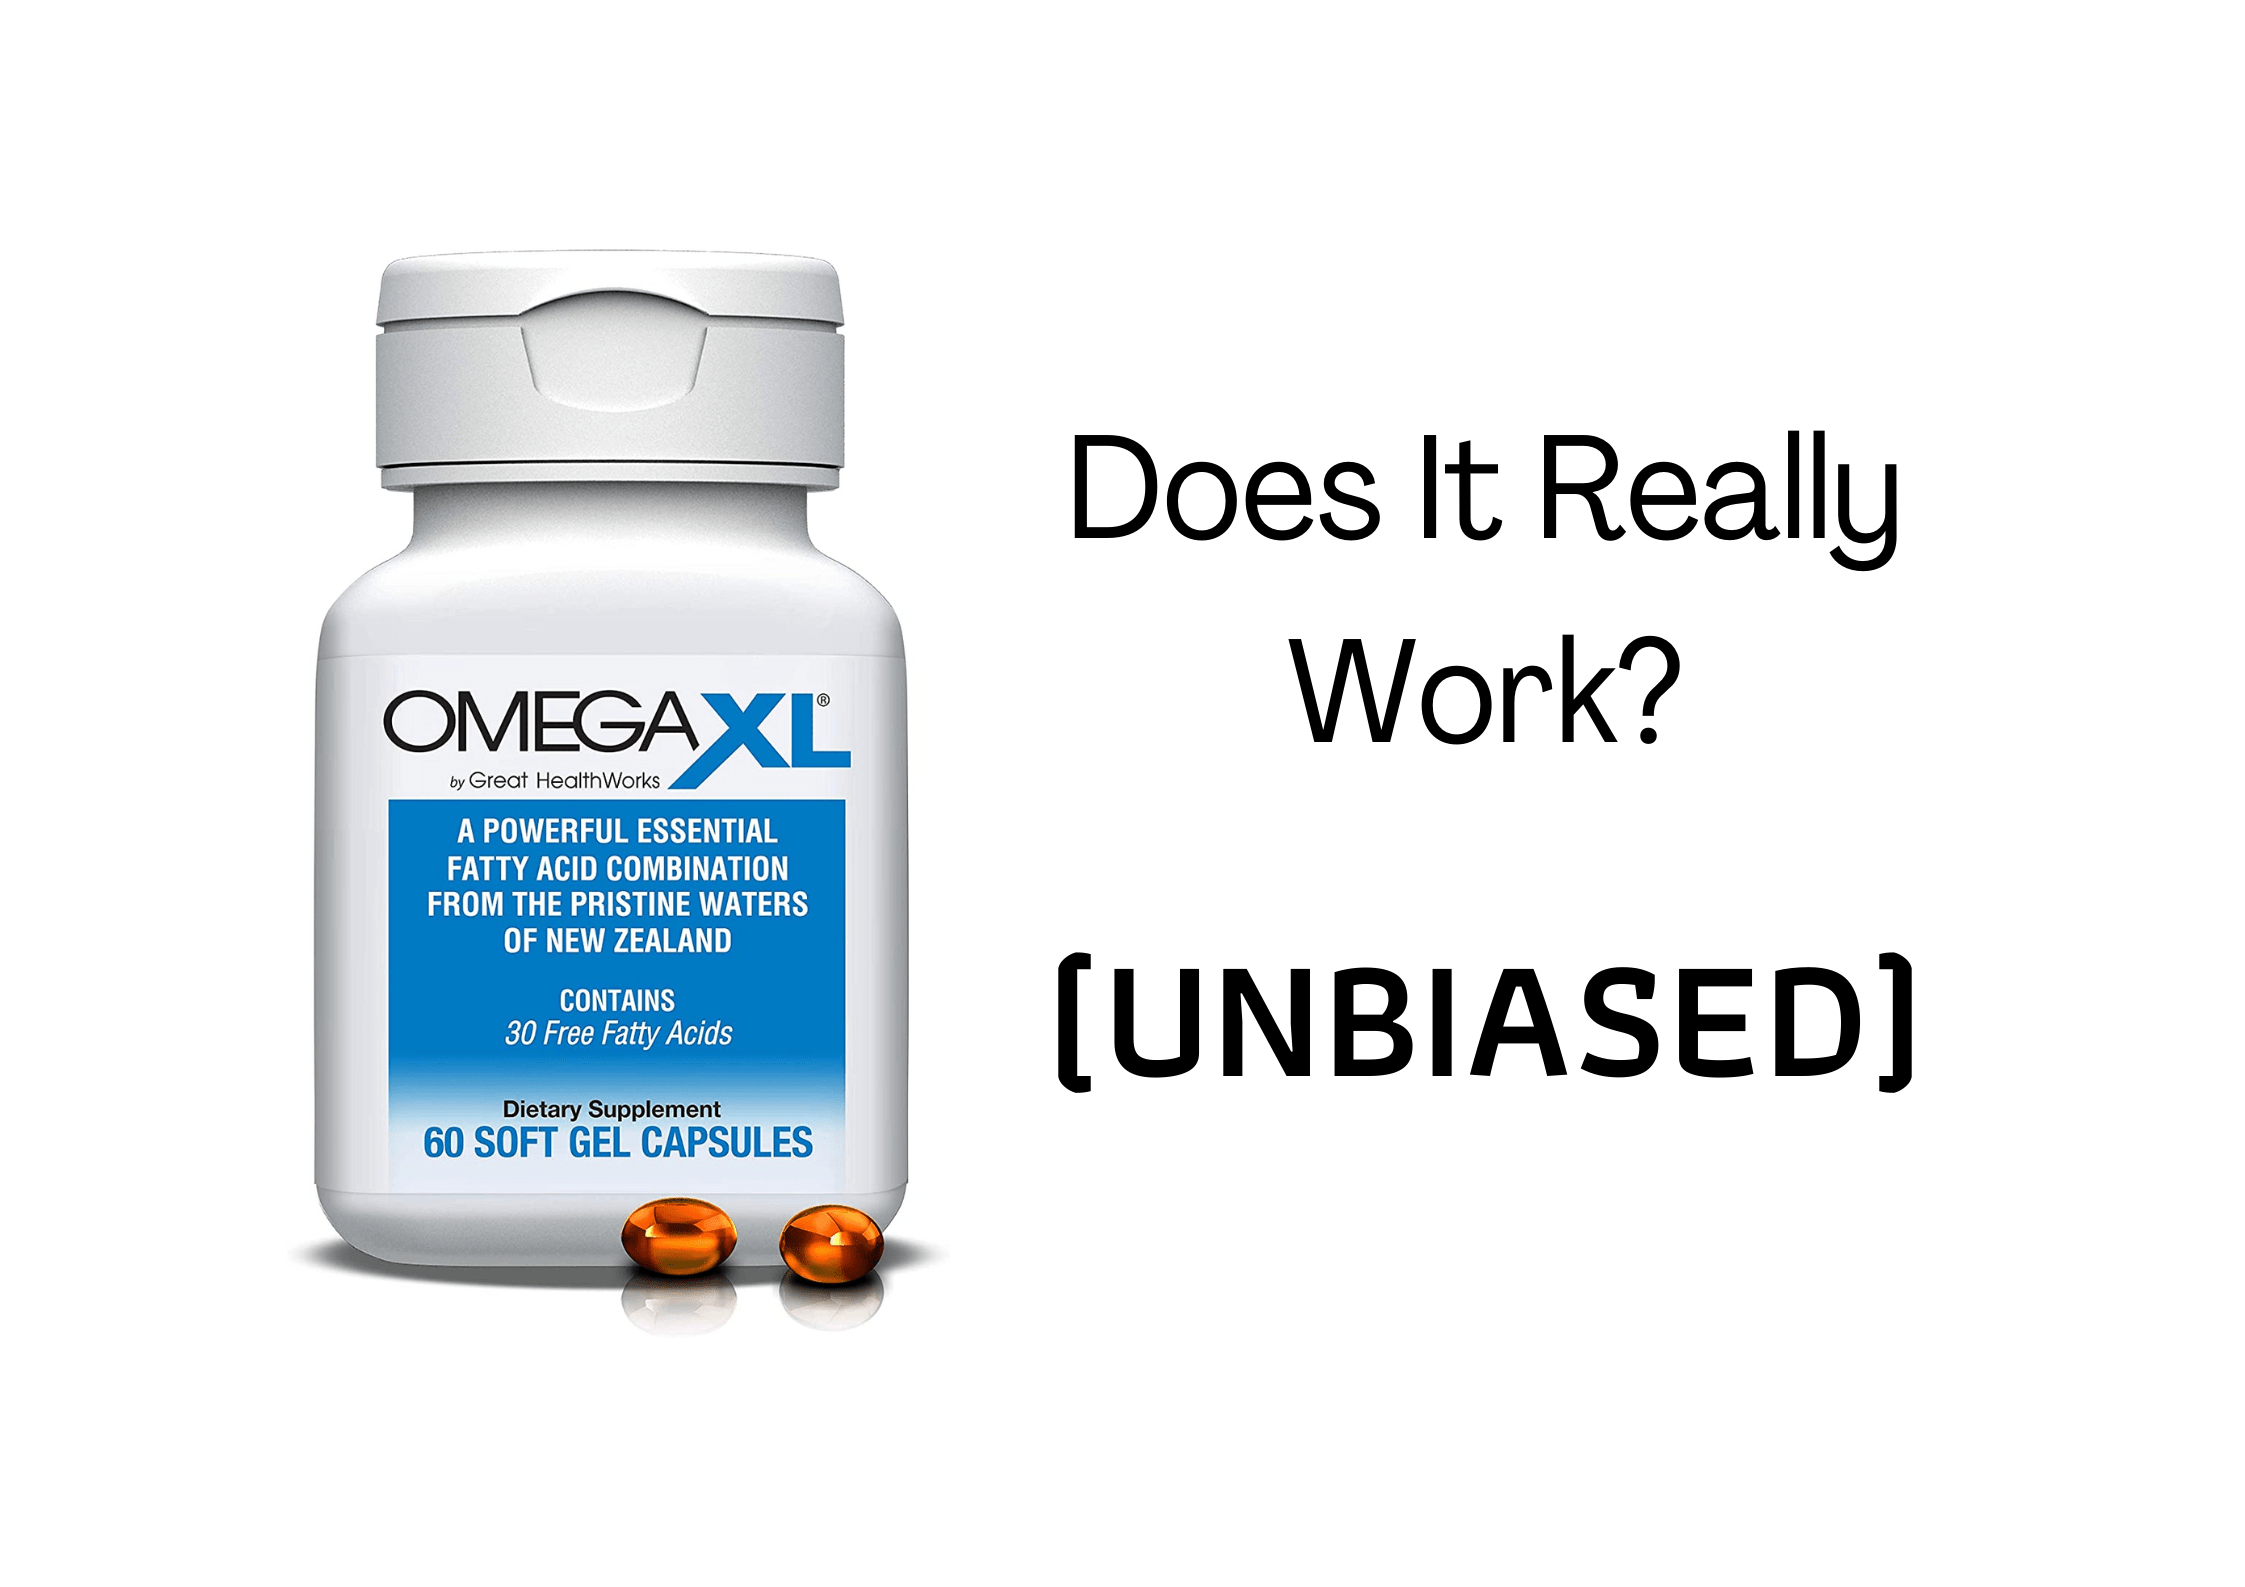 Omega XL Reviews | Does It Really Work? - Cheaperks